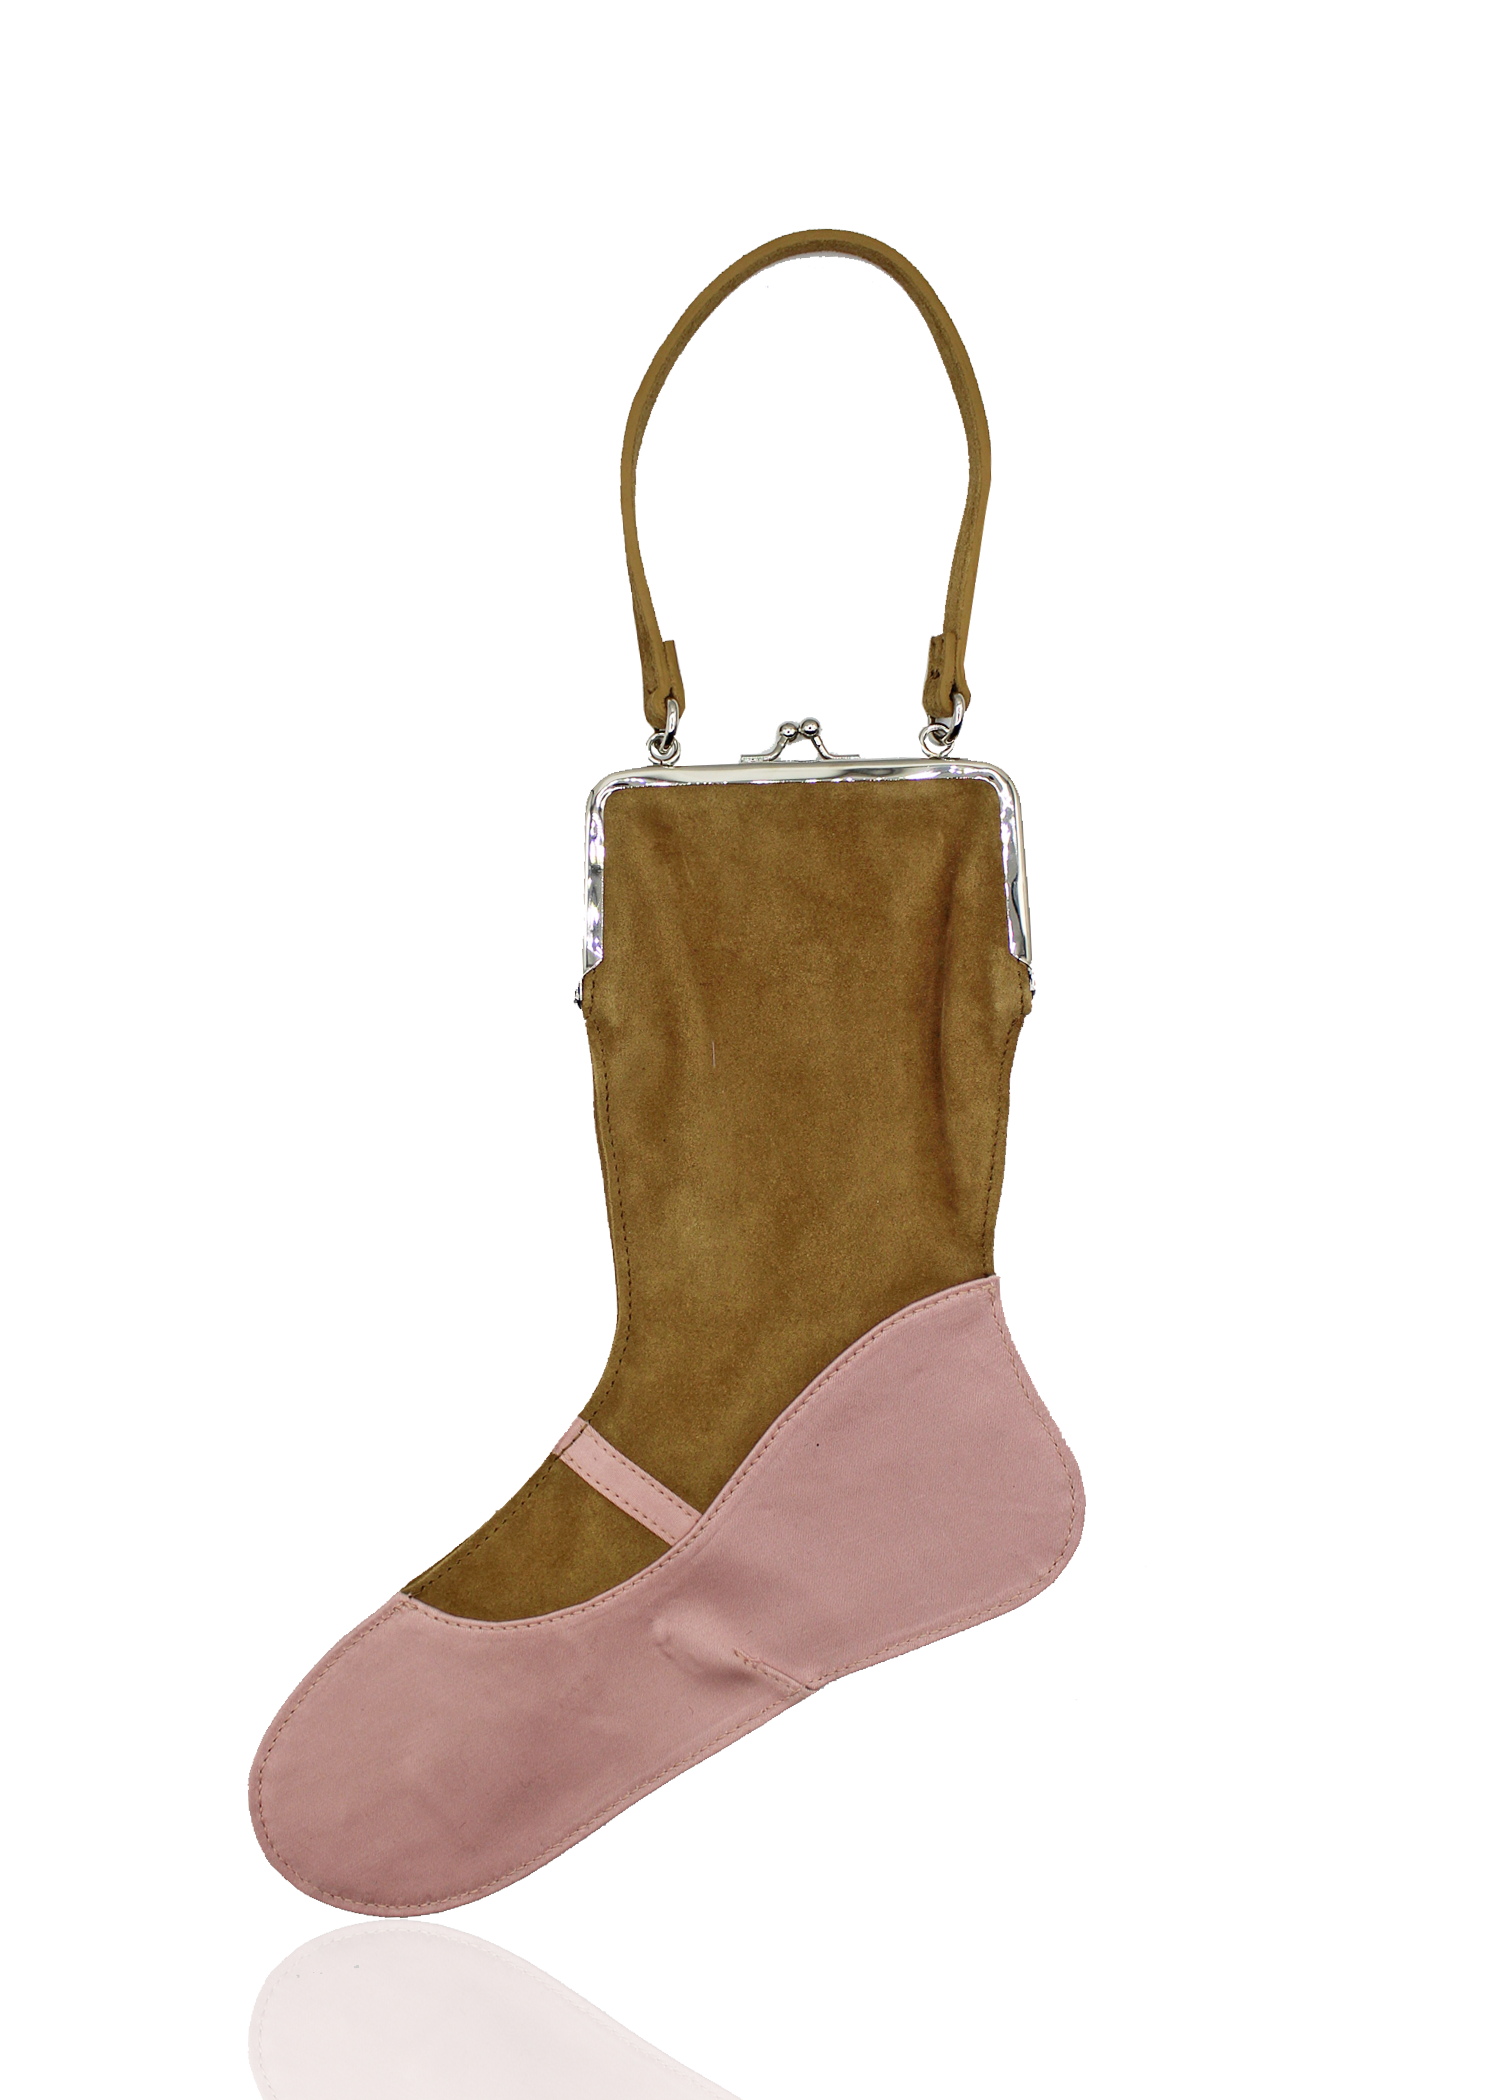 Tan suede and slipper pink cotton twill ballerina slipper bag with silver bag clasp.